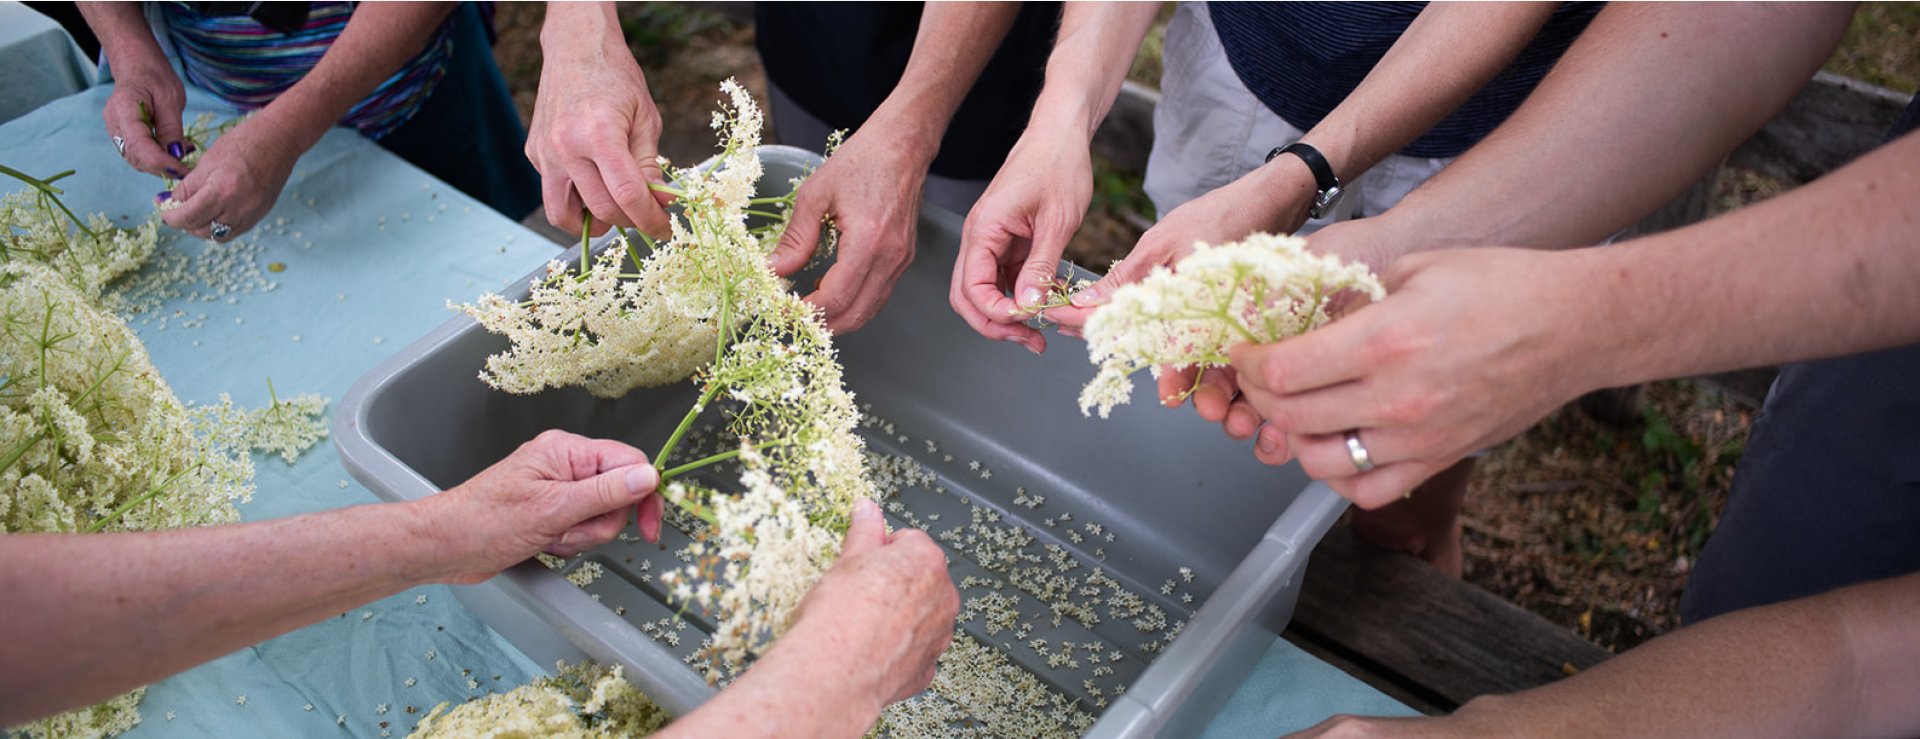 Group of people helping to pick Elderflower for a foraging program - closeup of hands and flowers